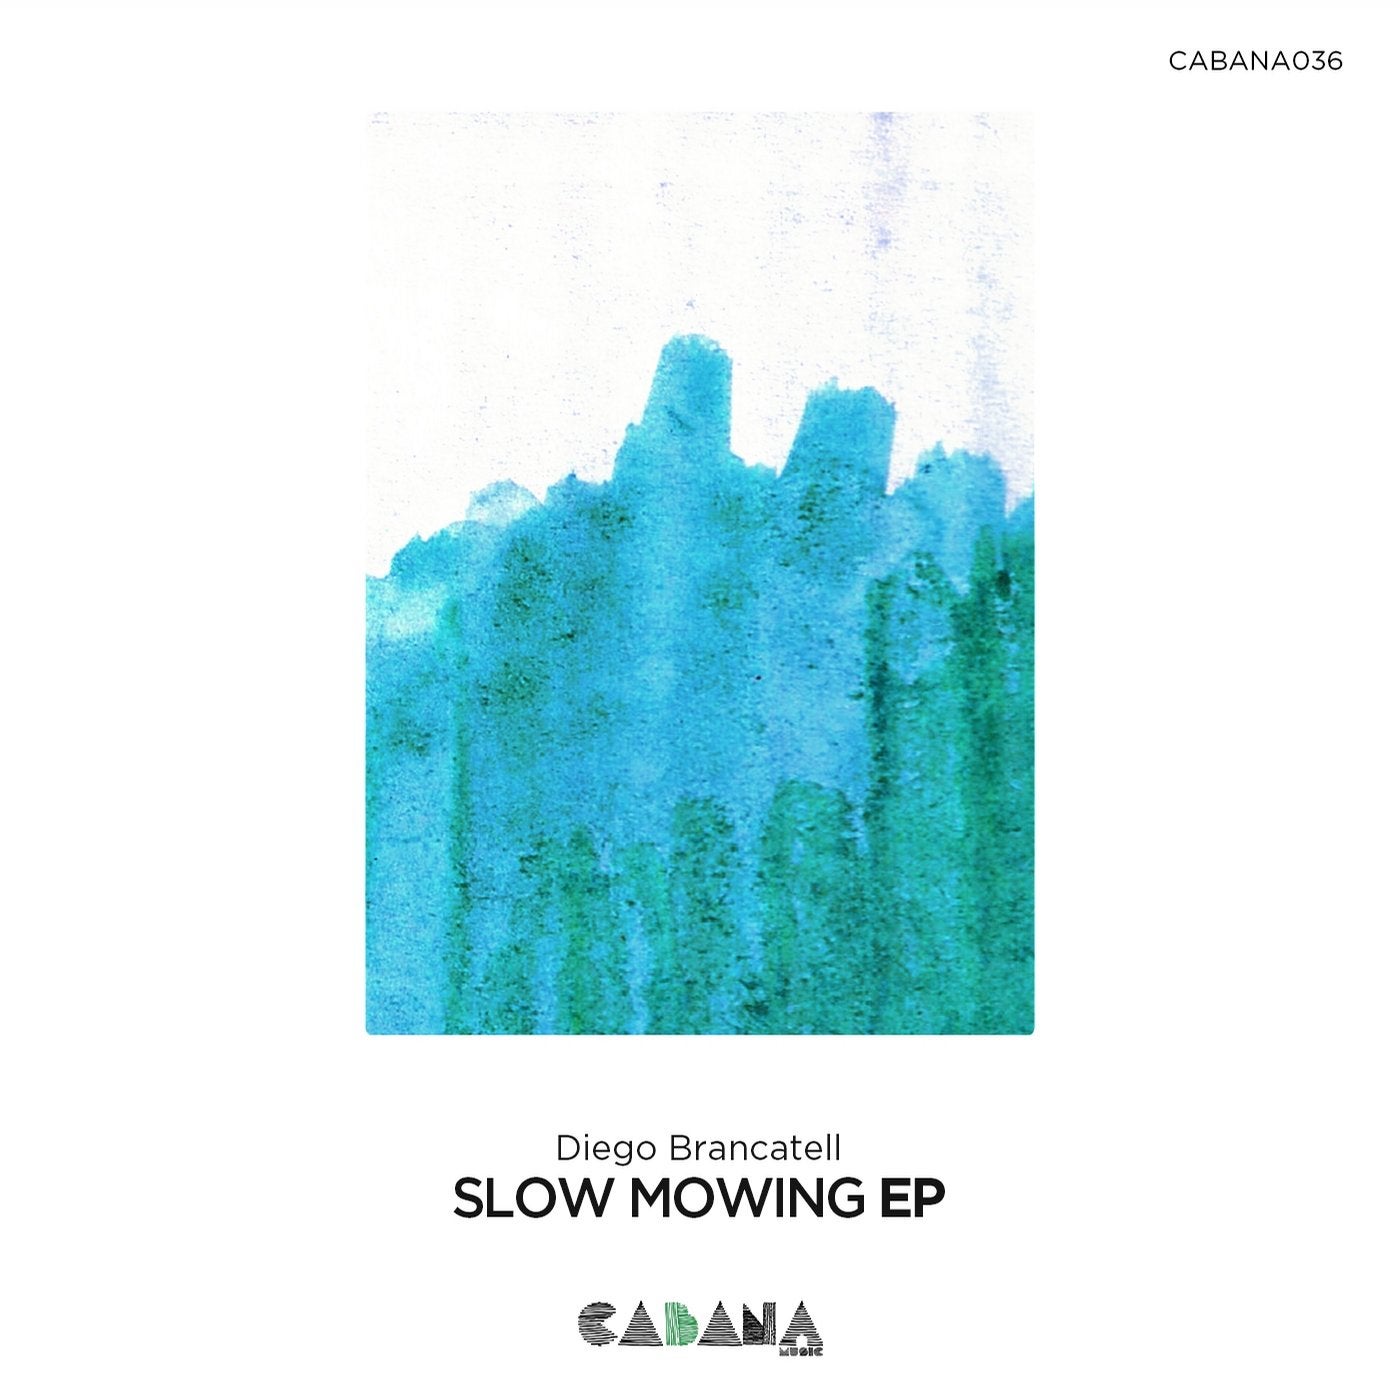 Slow Mowing EP